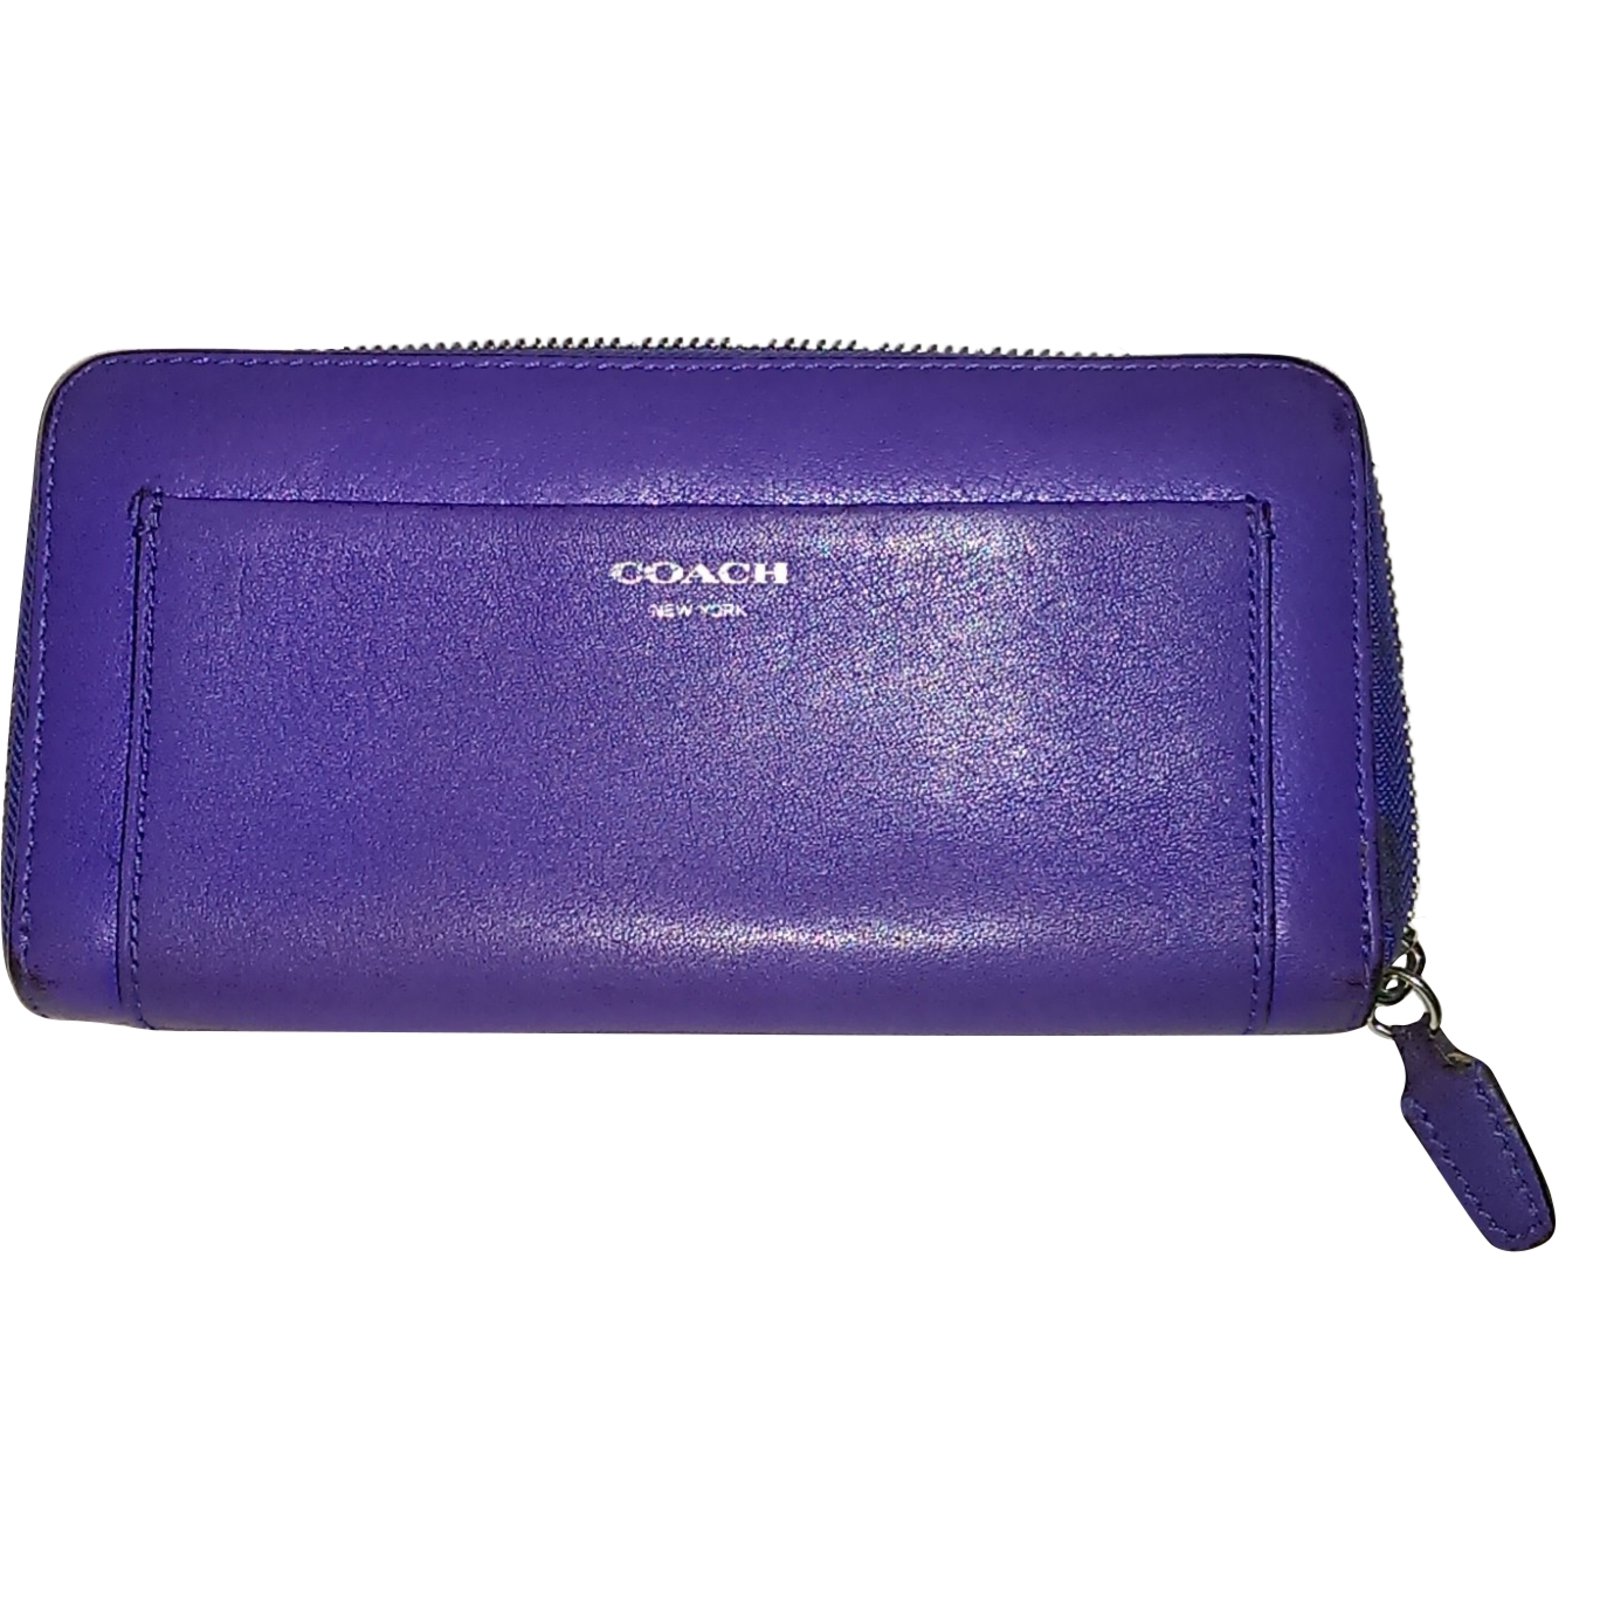 Latest Coach Wallets & Card Holders arrivals - Women - 7 products |  FASHIOLA.in